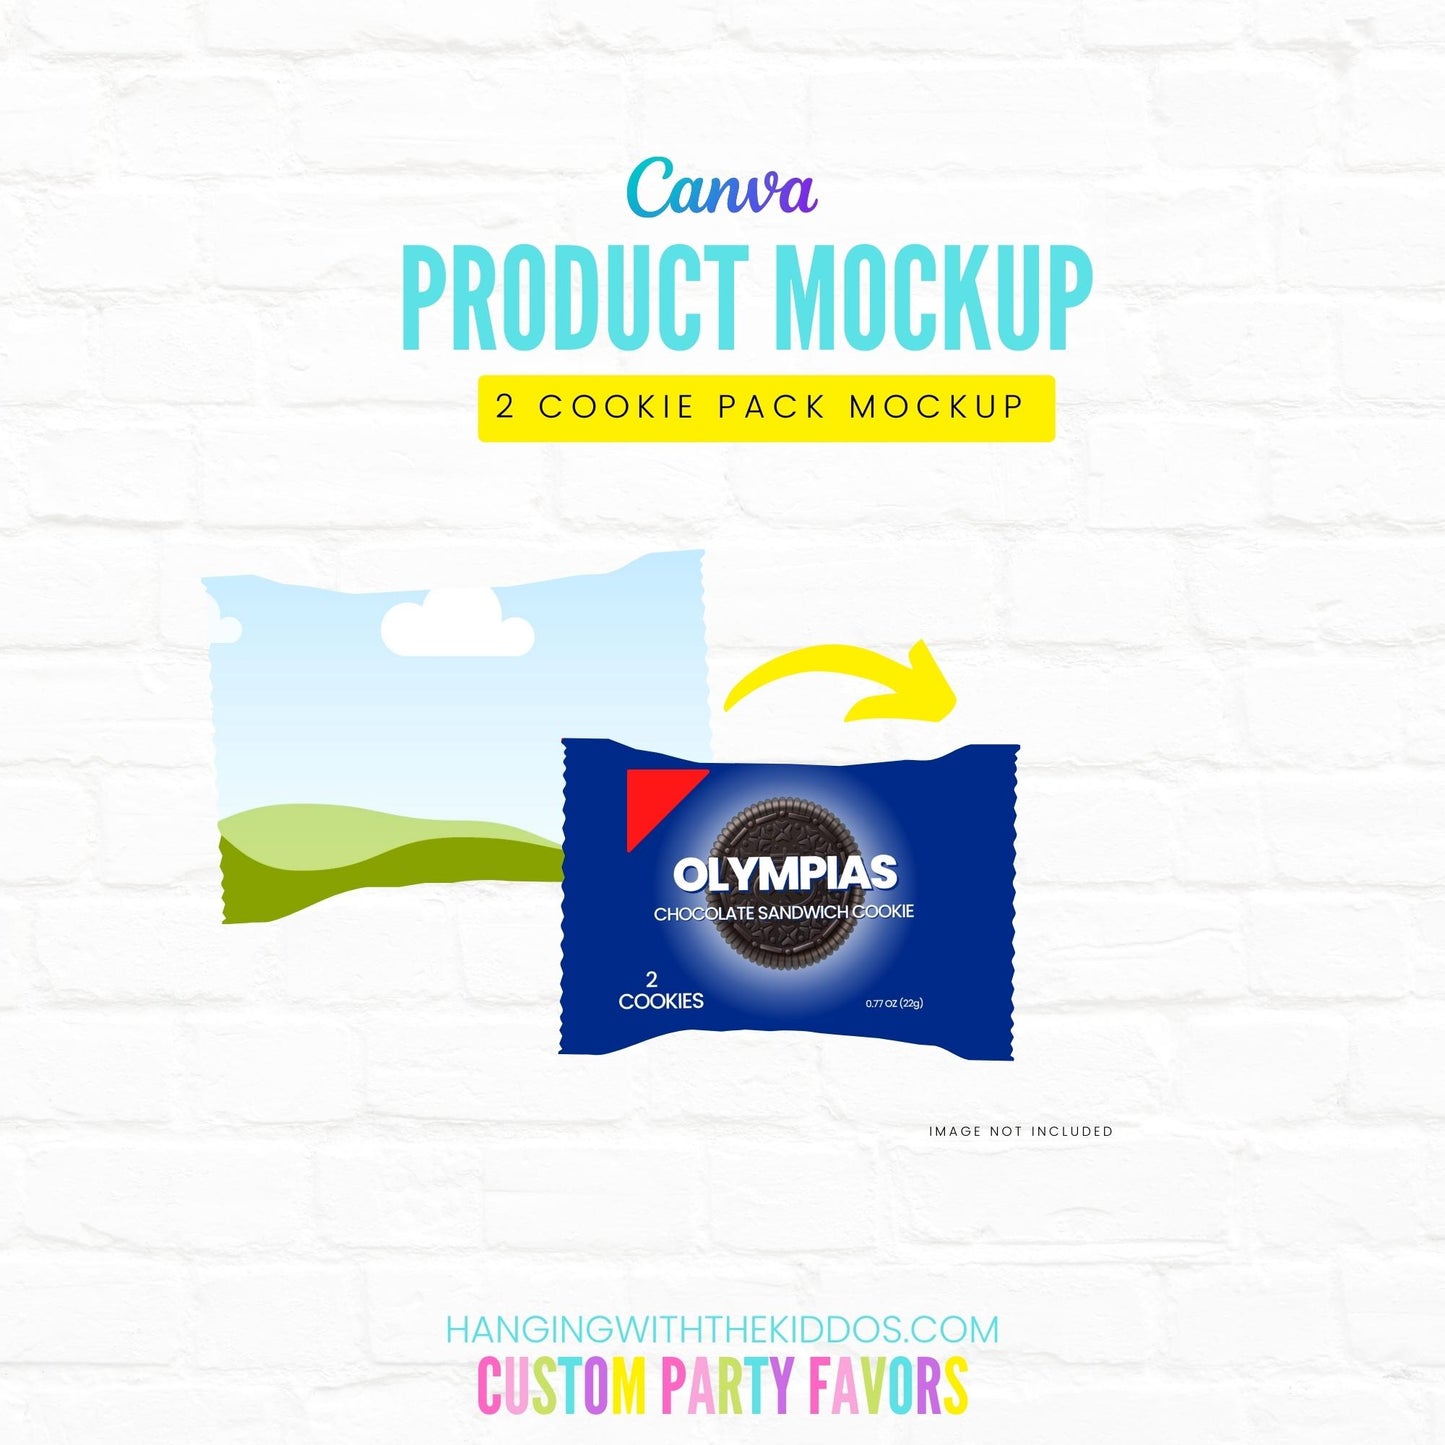 2 Cookies Pack Mockup|Canva Template